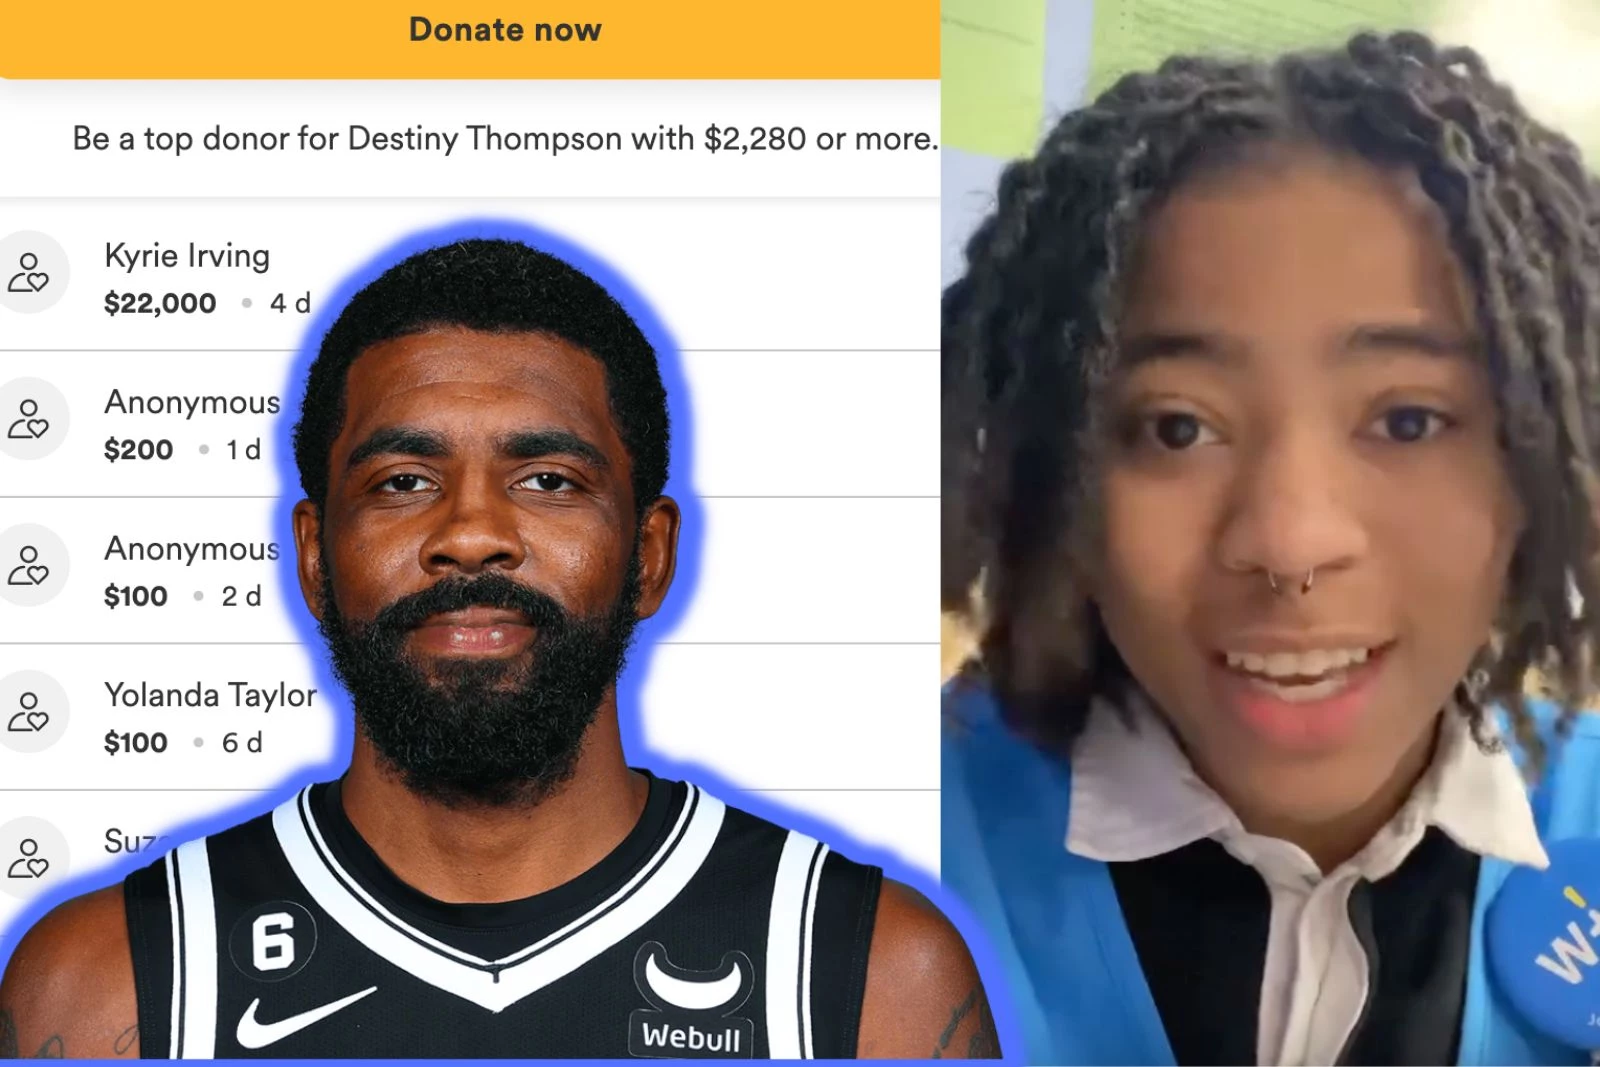 NBA pro Kyrie Irving donates $22K to college undergrad from NJ pic